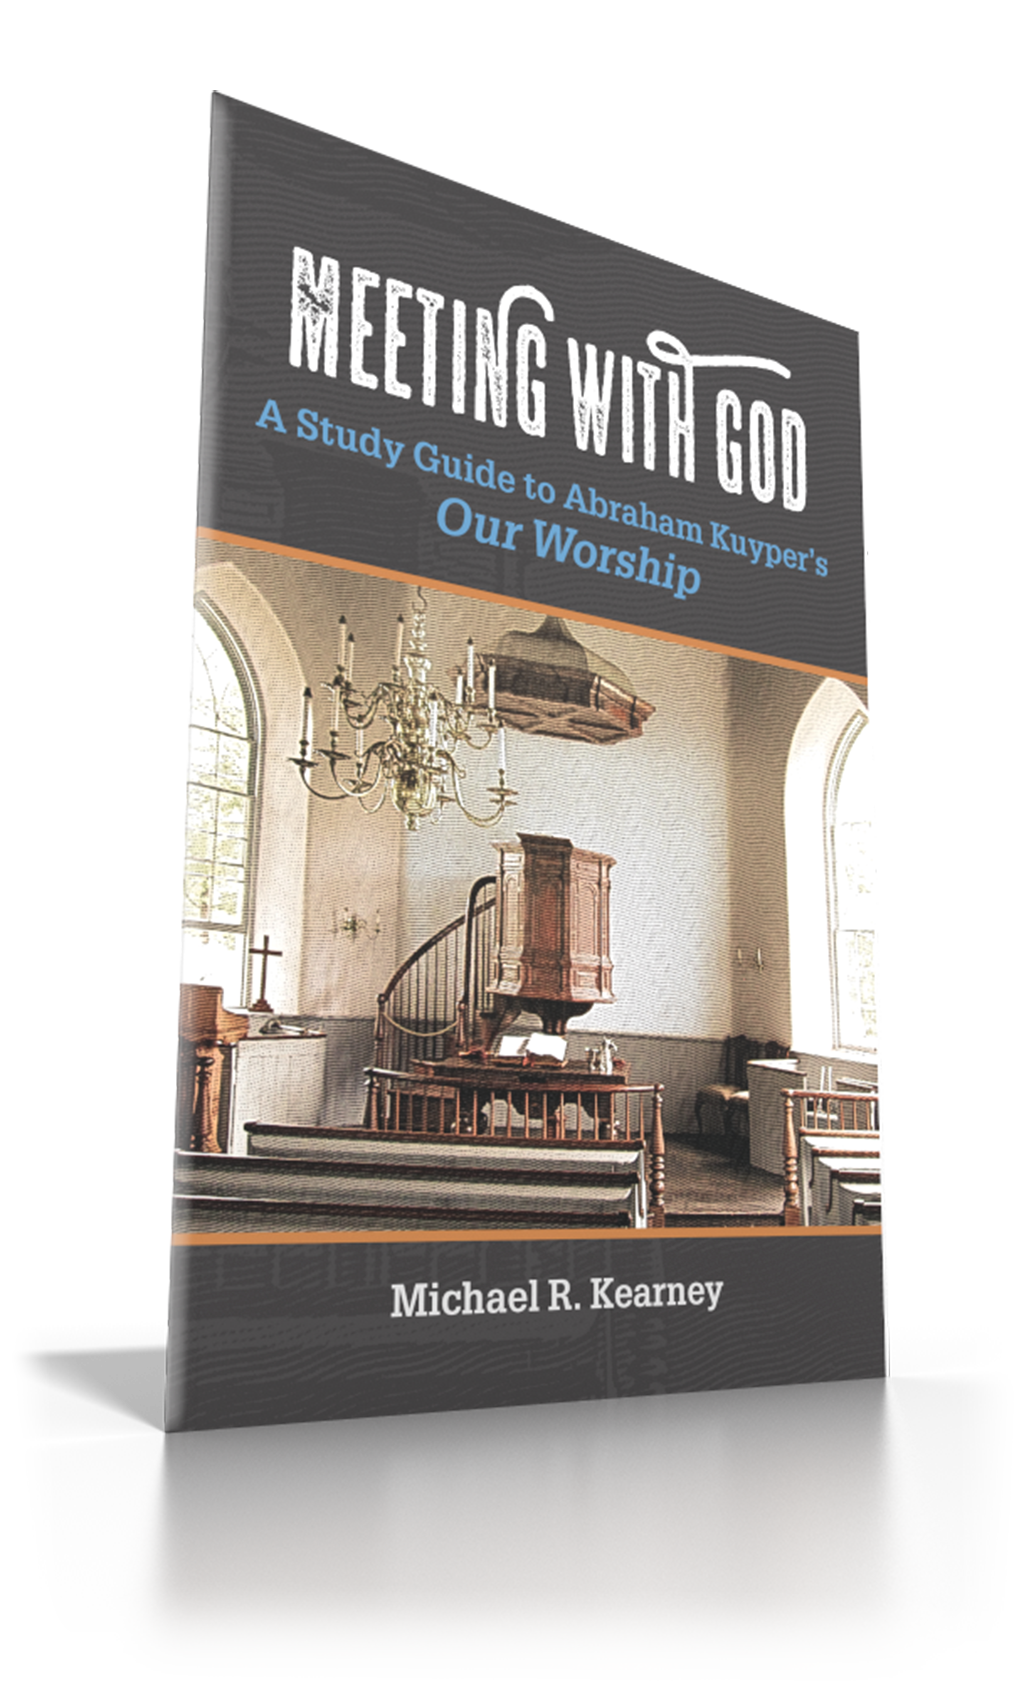 Meeting with God: A Study Guide to Abraham Kuyper’s Our Worship